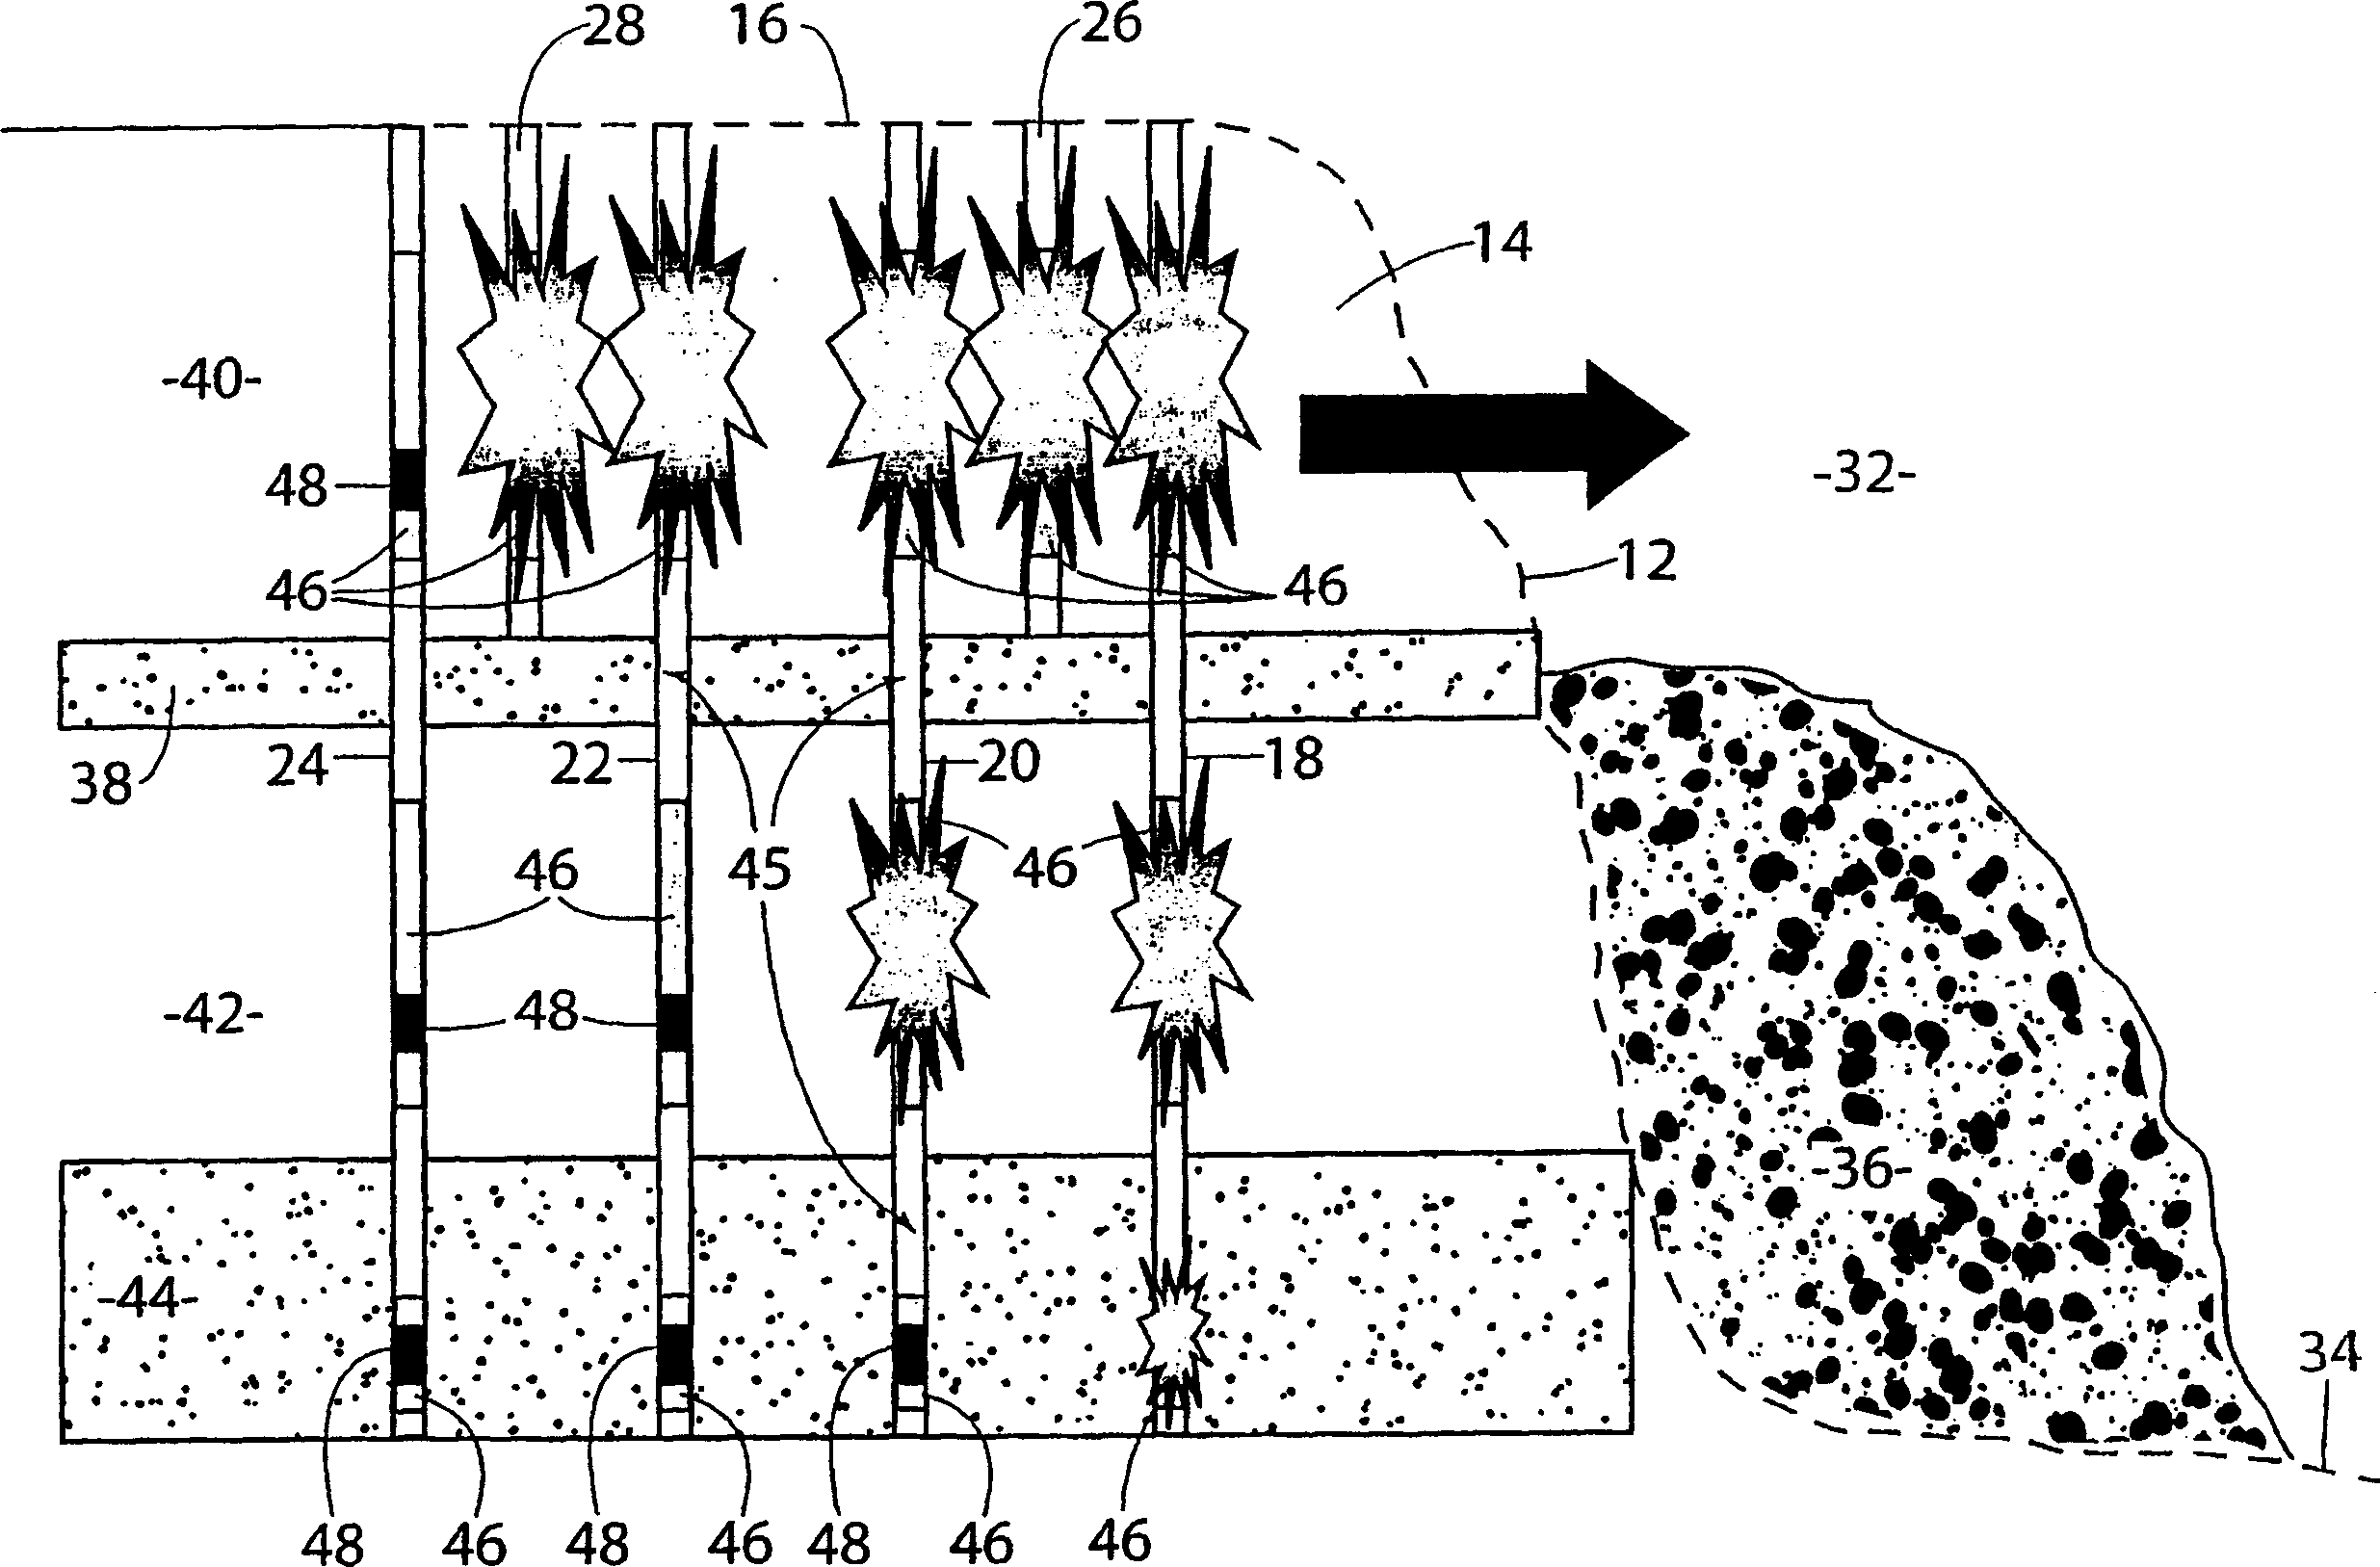 Method of blasting multiple layers or levels of rock